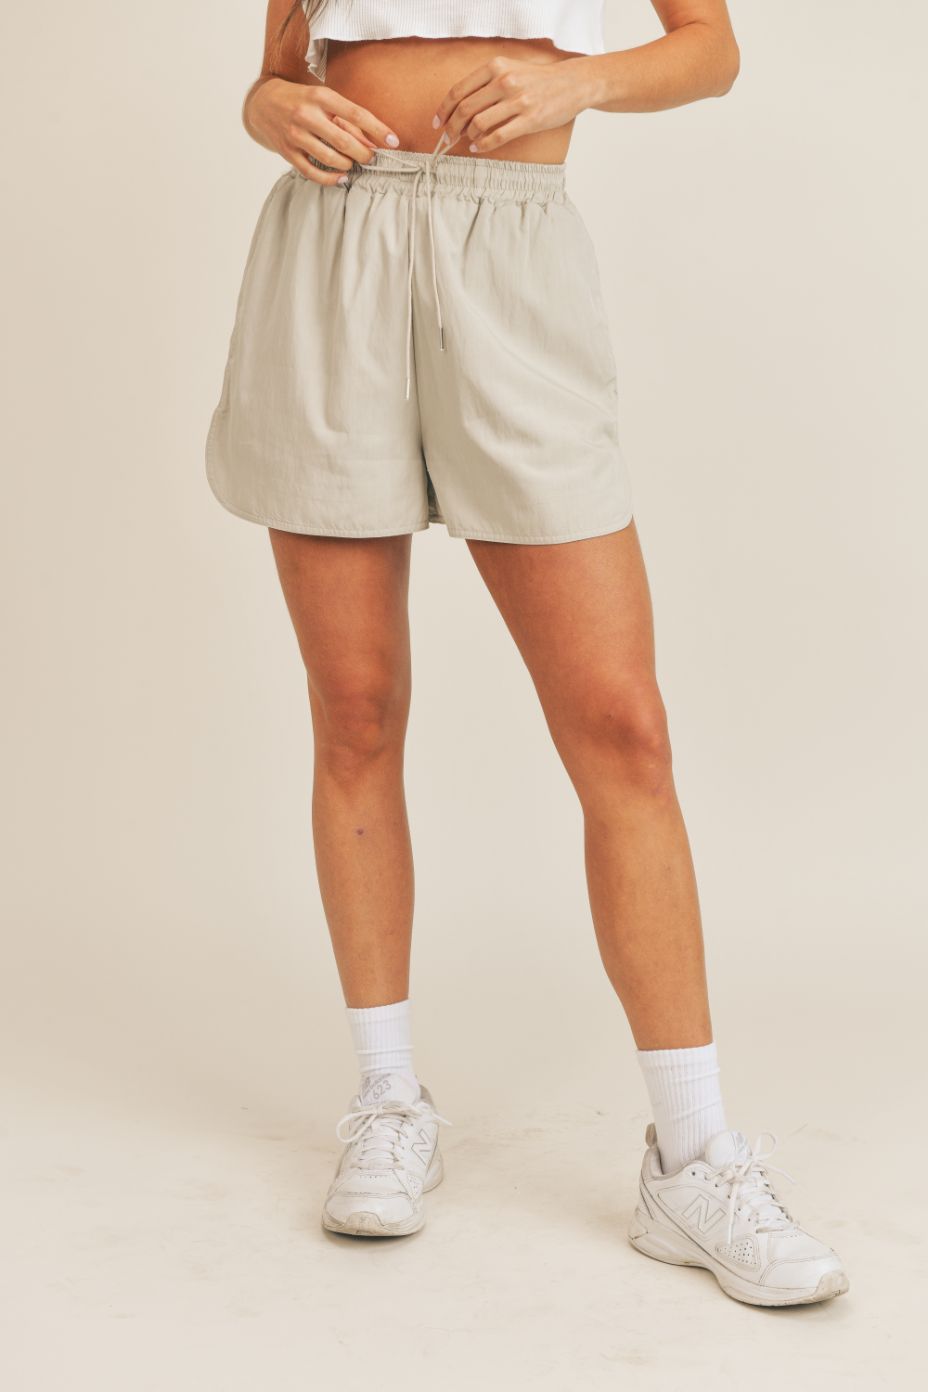 On My Way Track Shorts - FINAL SALE